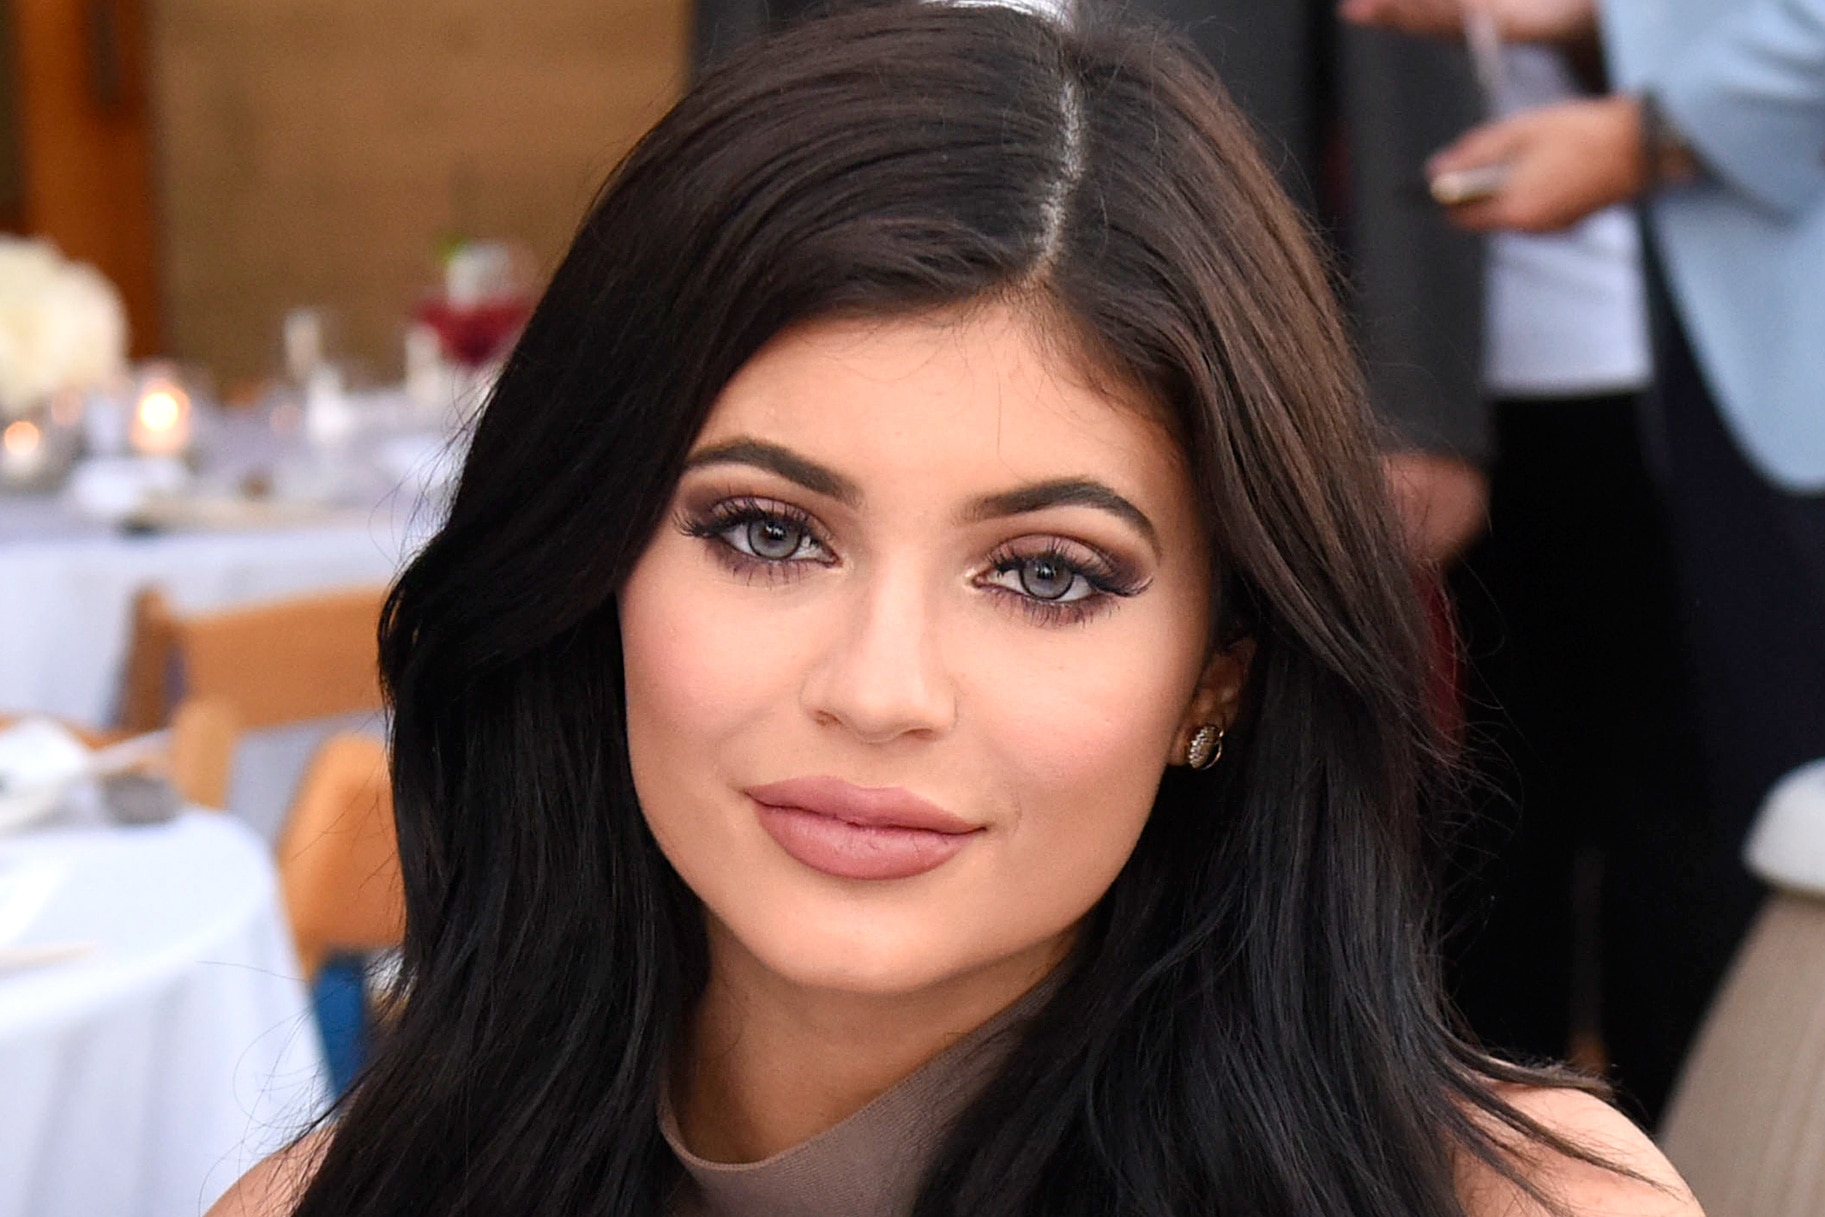 2. How to Get Kylie Jenner's Blue Hair Color at Home - wide 9